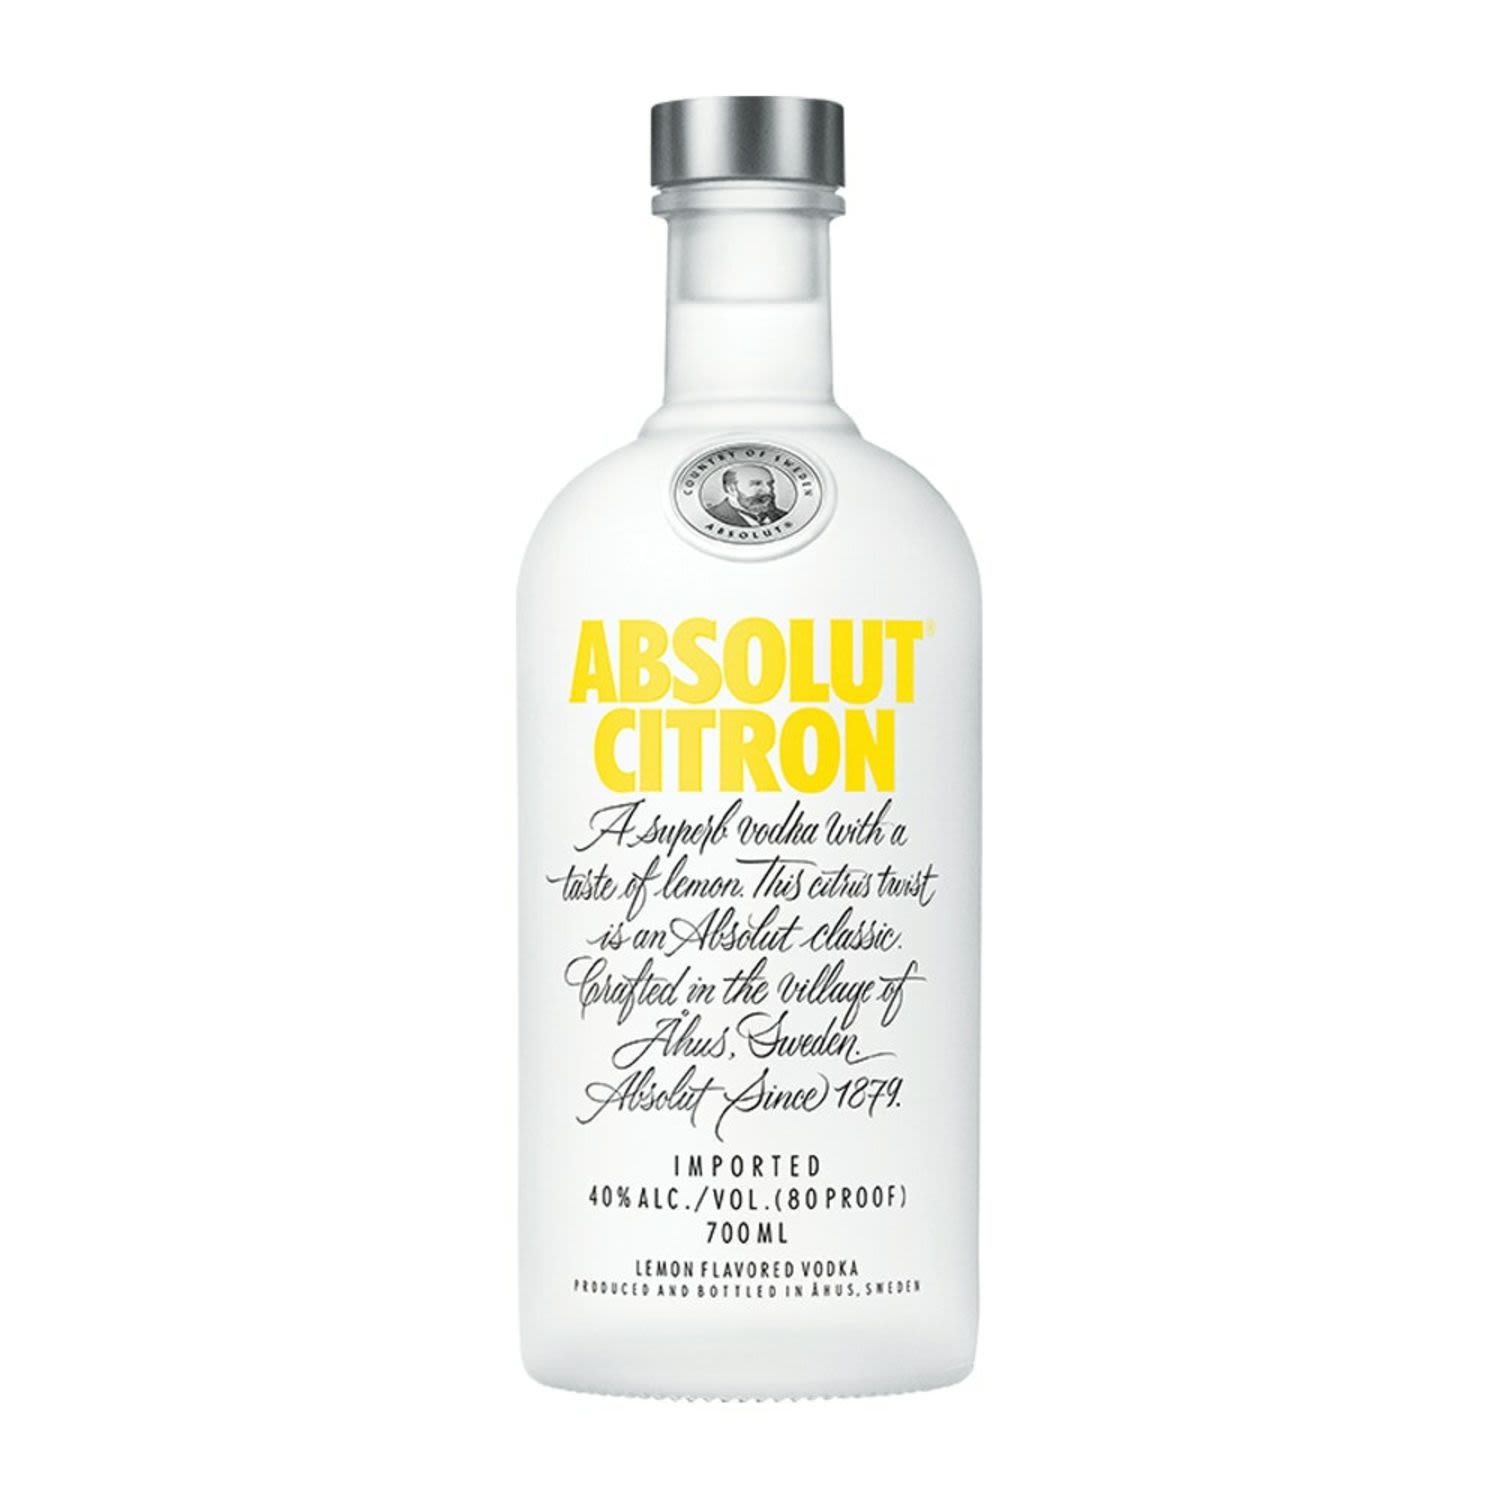 Using lemon and just a hint of lime, Absolut have found the perfect balance of richness from the grain and water, tartness from the citrus fruits and just a hint of bitterness from the lemon peel.<br /> <br />Alcohol Volume: 40.00%<br /><br />Pack Format: Bottle<br /><br />Standard Drinks: 22</br /><br />Pack Type: Bottle<br /><br />Country of Origin: Sweden<br />